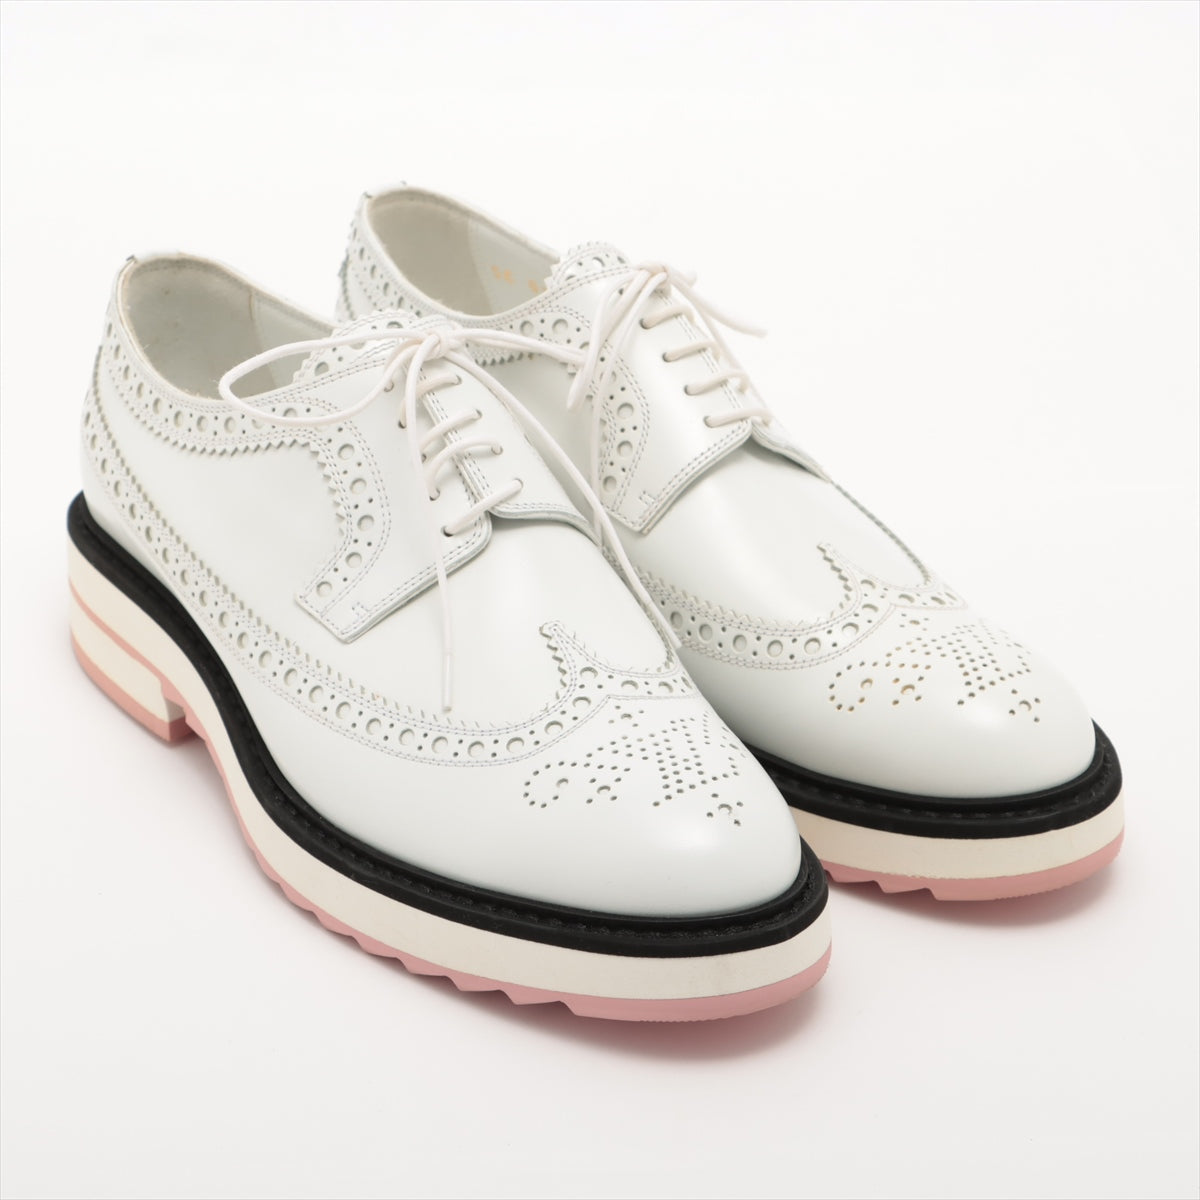 Louis Vuitton 15 years Leather Leather shoes 36 Ladies' White SC0195 LV Logo Is there a replacement string